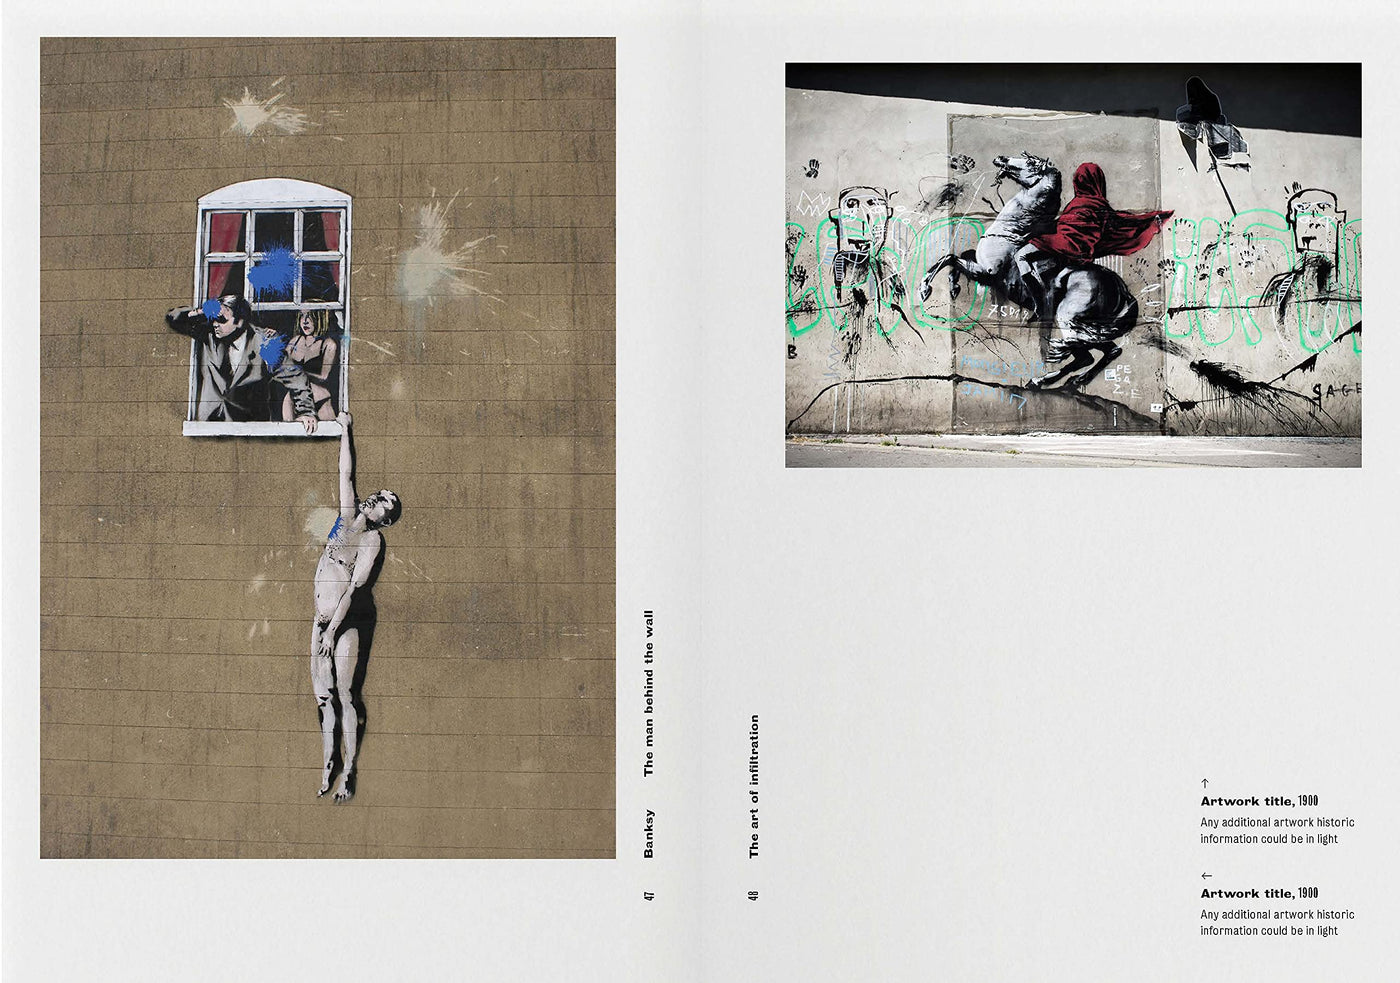 Banksy: The Man behind the Wall: Revised and Illustrated Edition